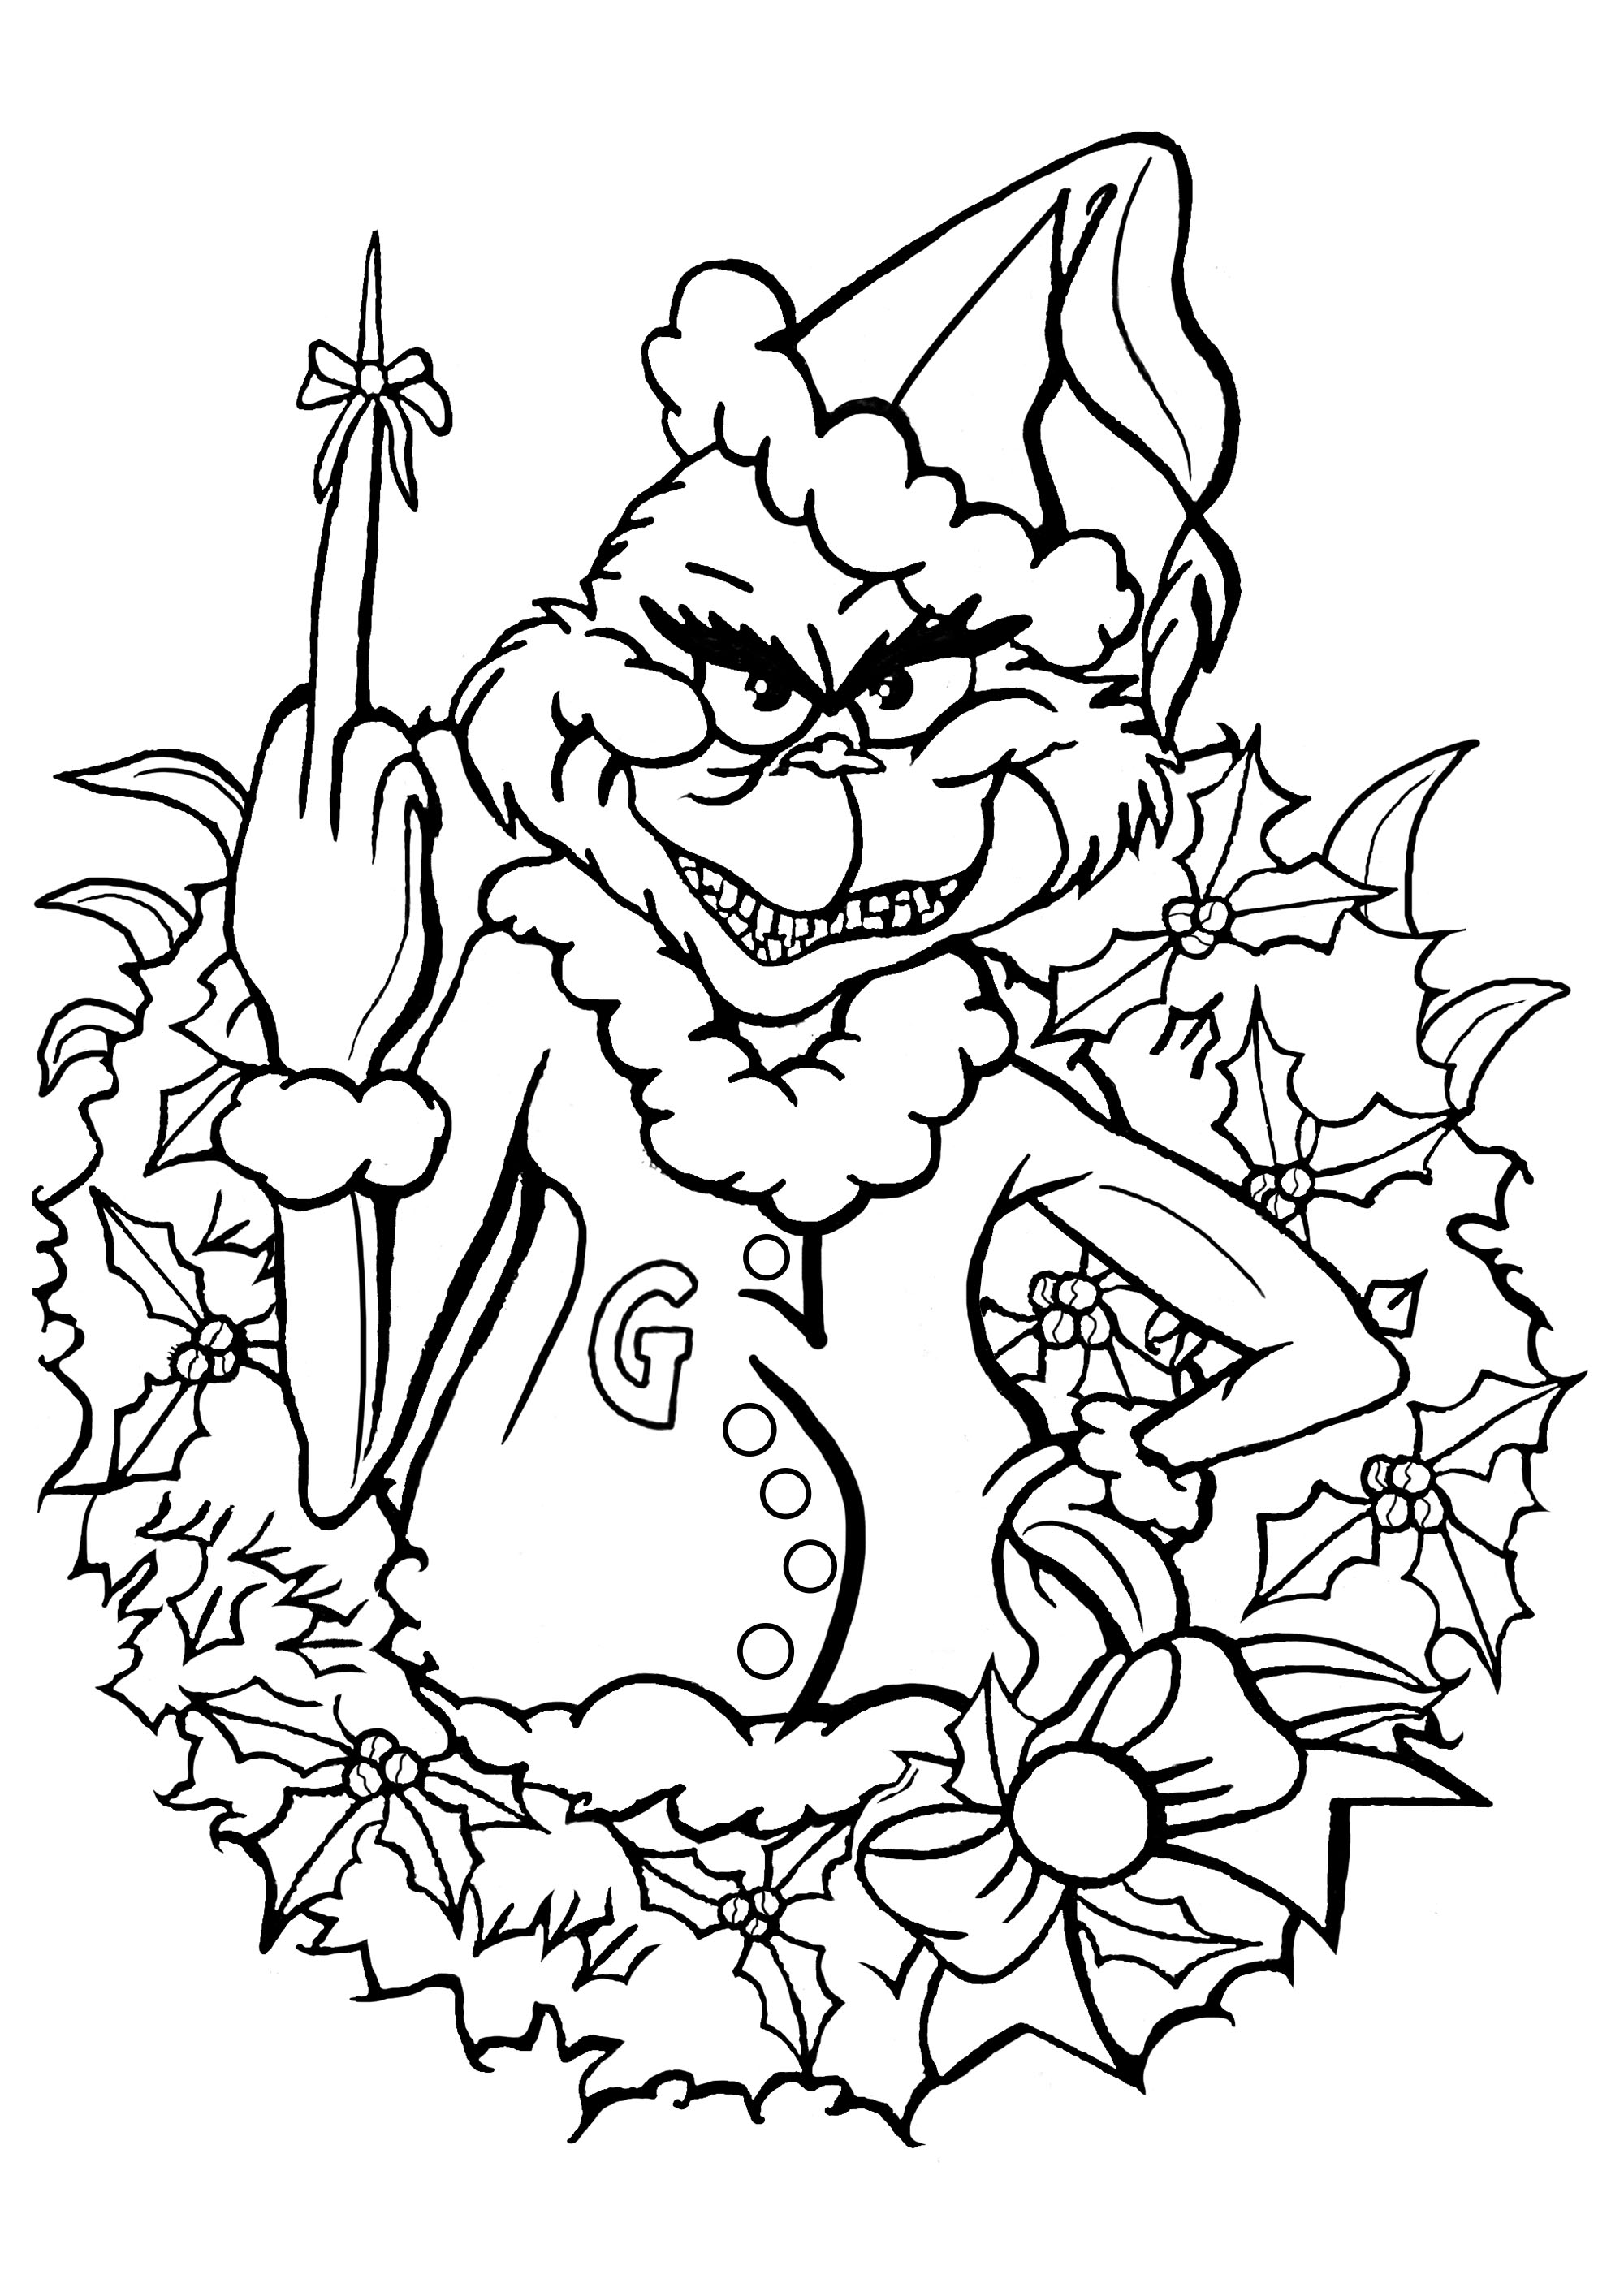 coloring-pages-the-grinch-wallpapers-hd-references